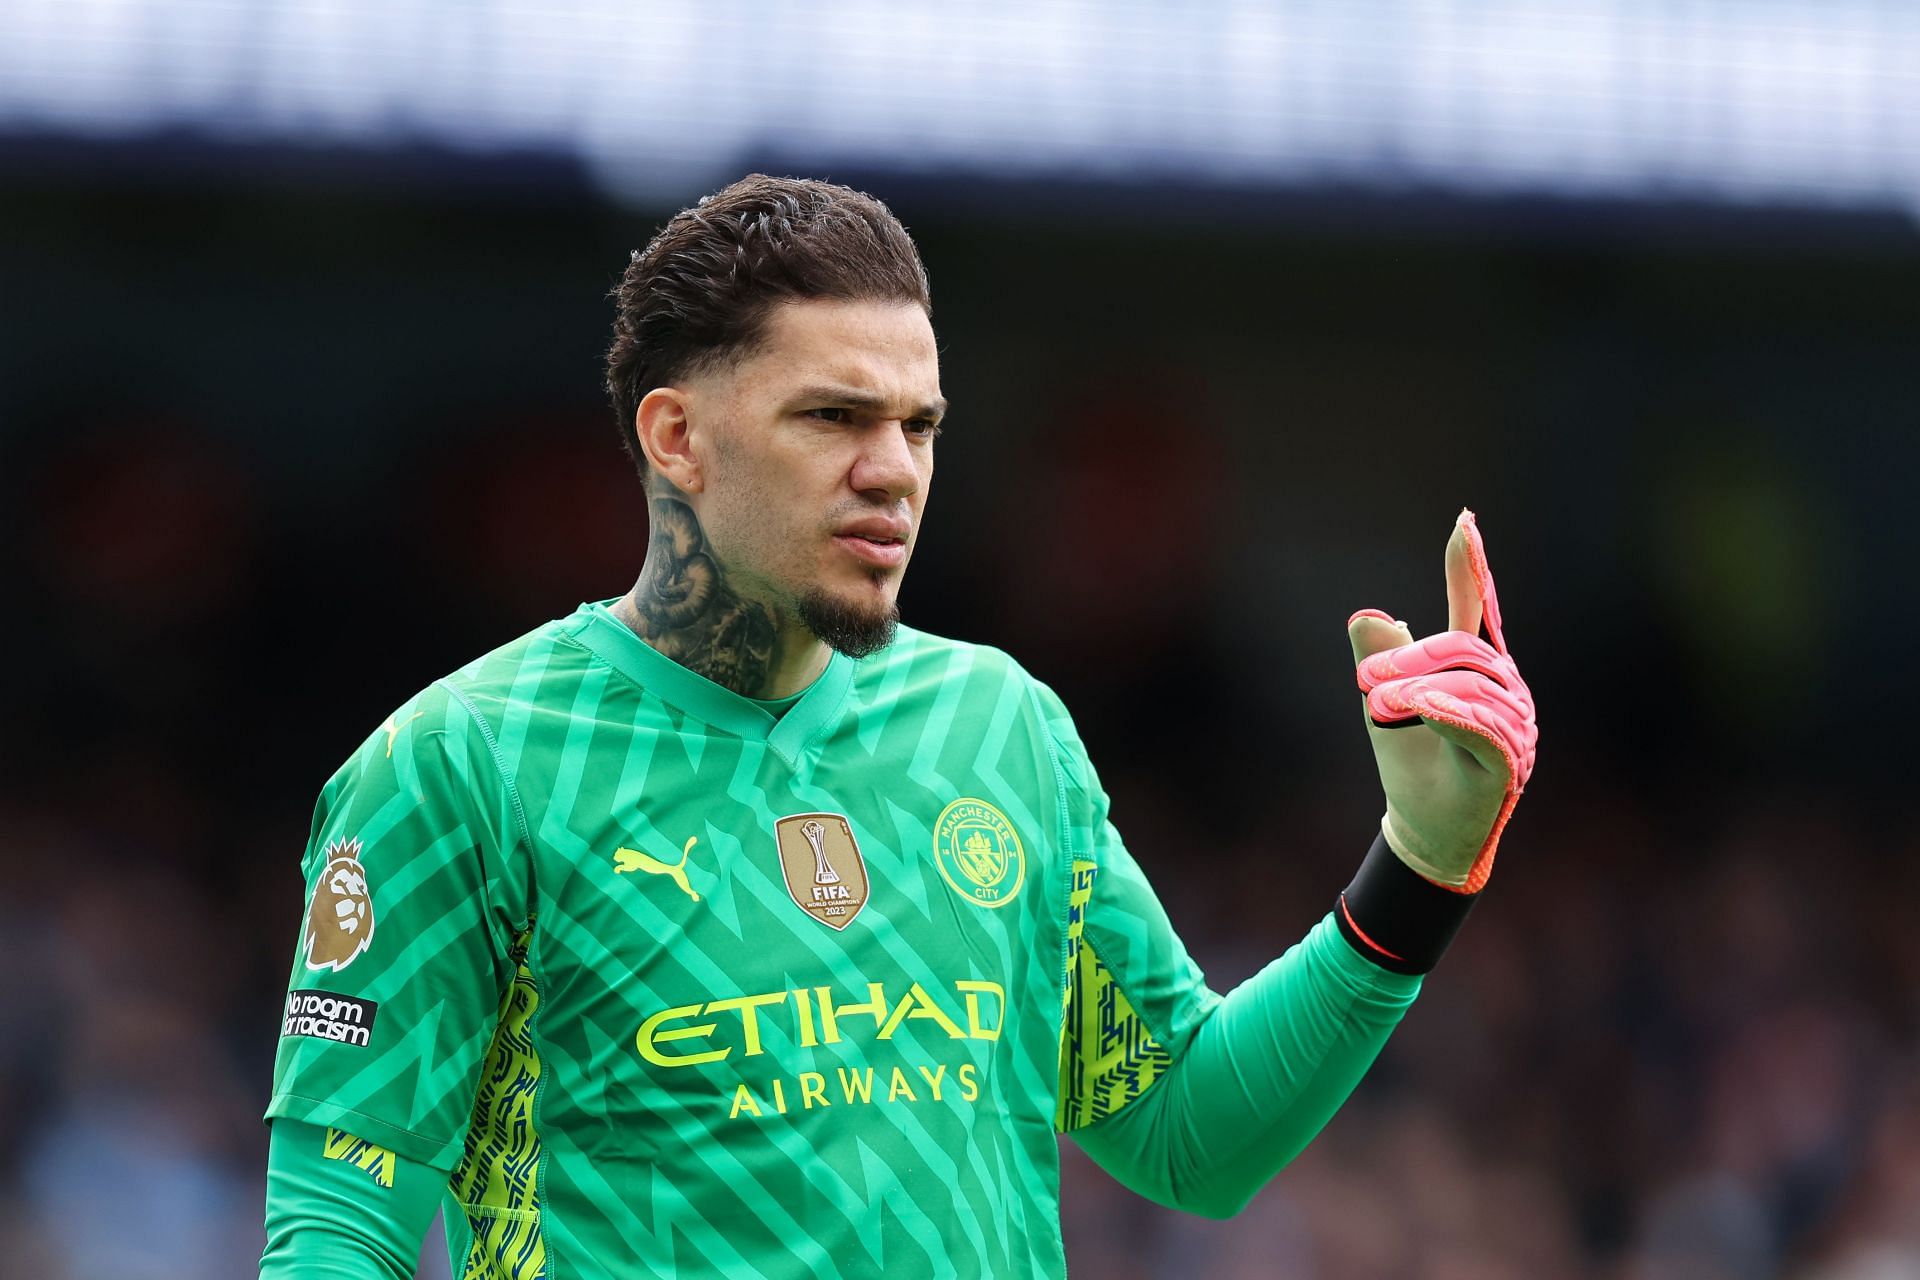 Manchester City shot stopper Ederson has been fantastic for the reigning Premier League champions